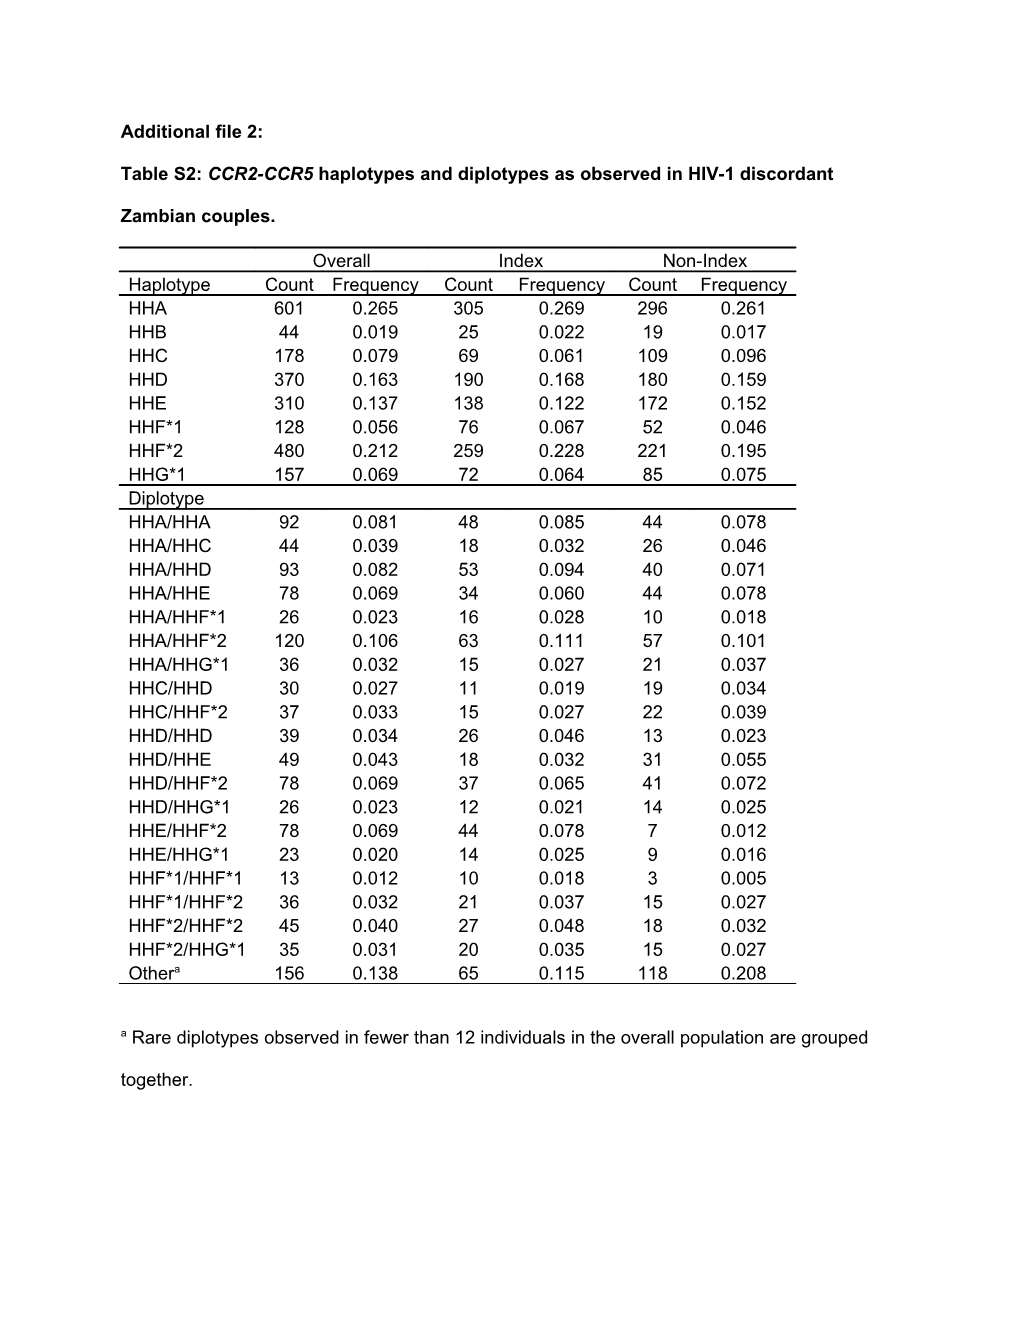 Table S2:CCR2-CCR5 Haplotypes and Diplotypes As Observed in HIV-1 Discordant Zambian Couples